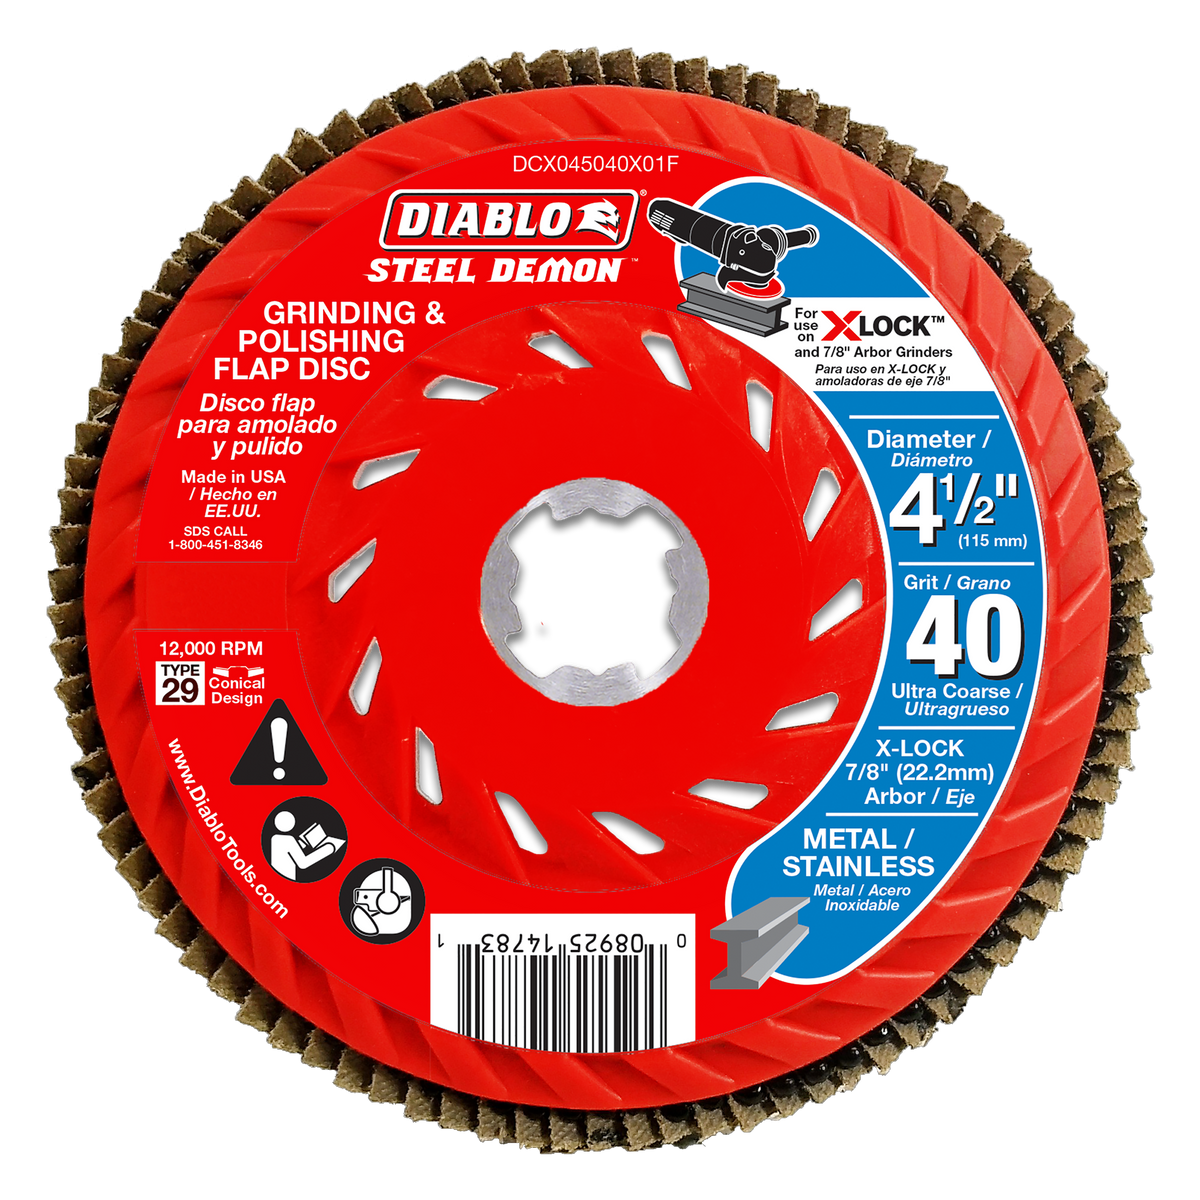 Diablo Flap Disc for X-Lock and All Grinders